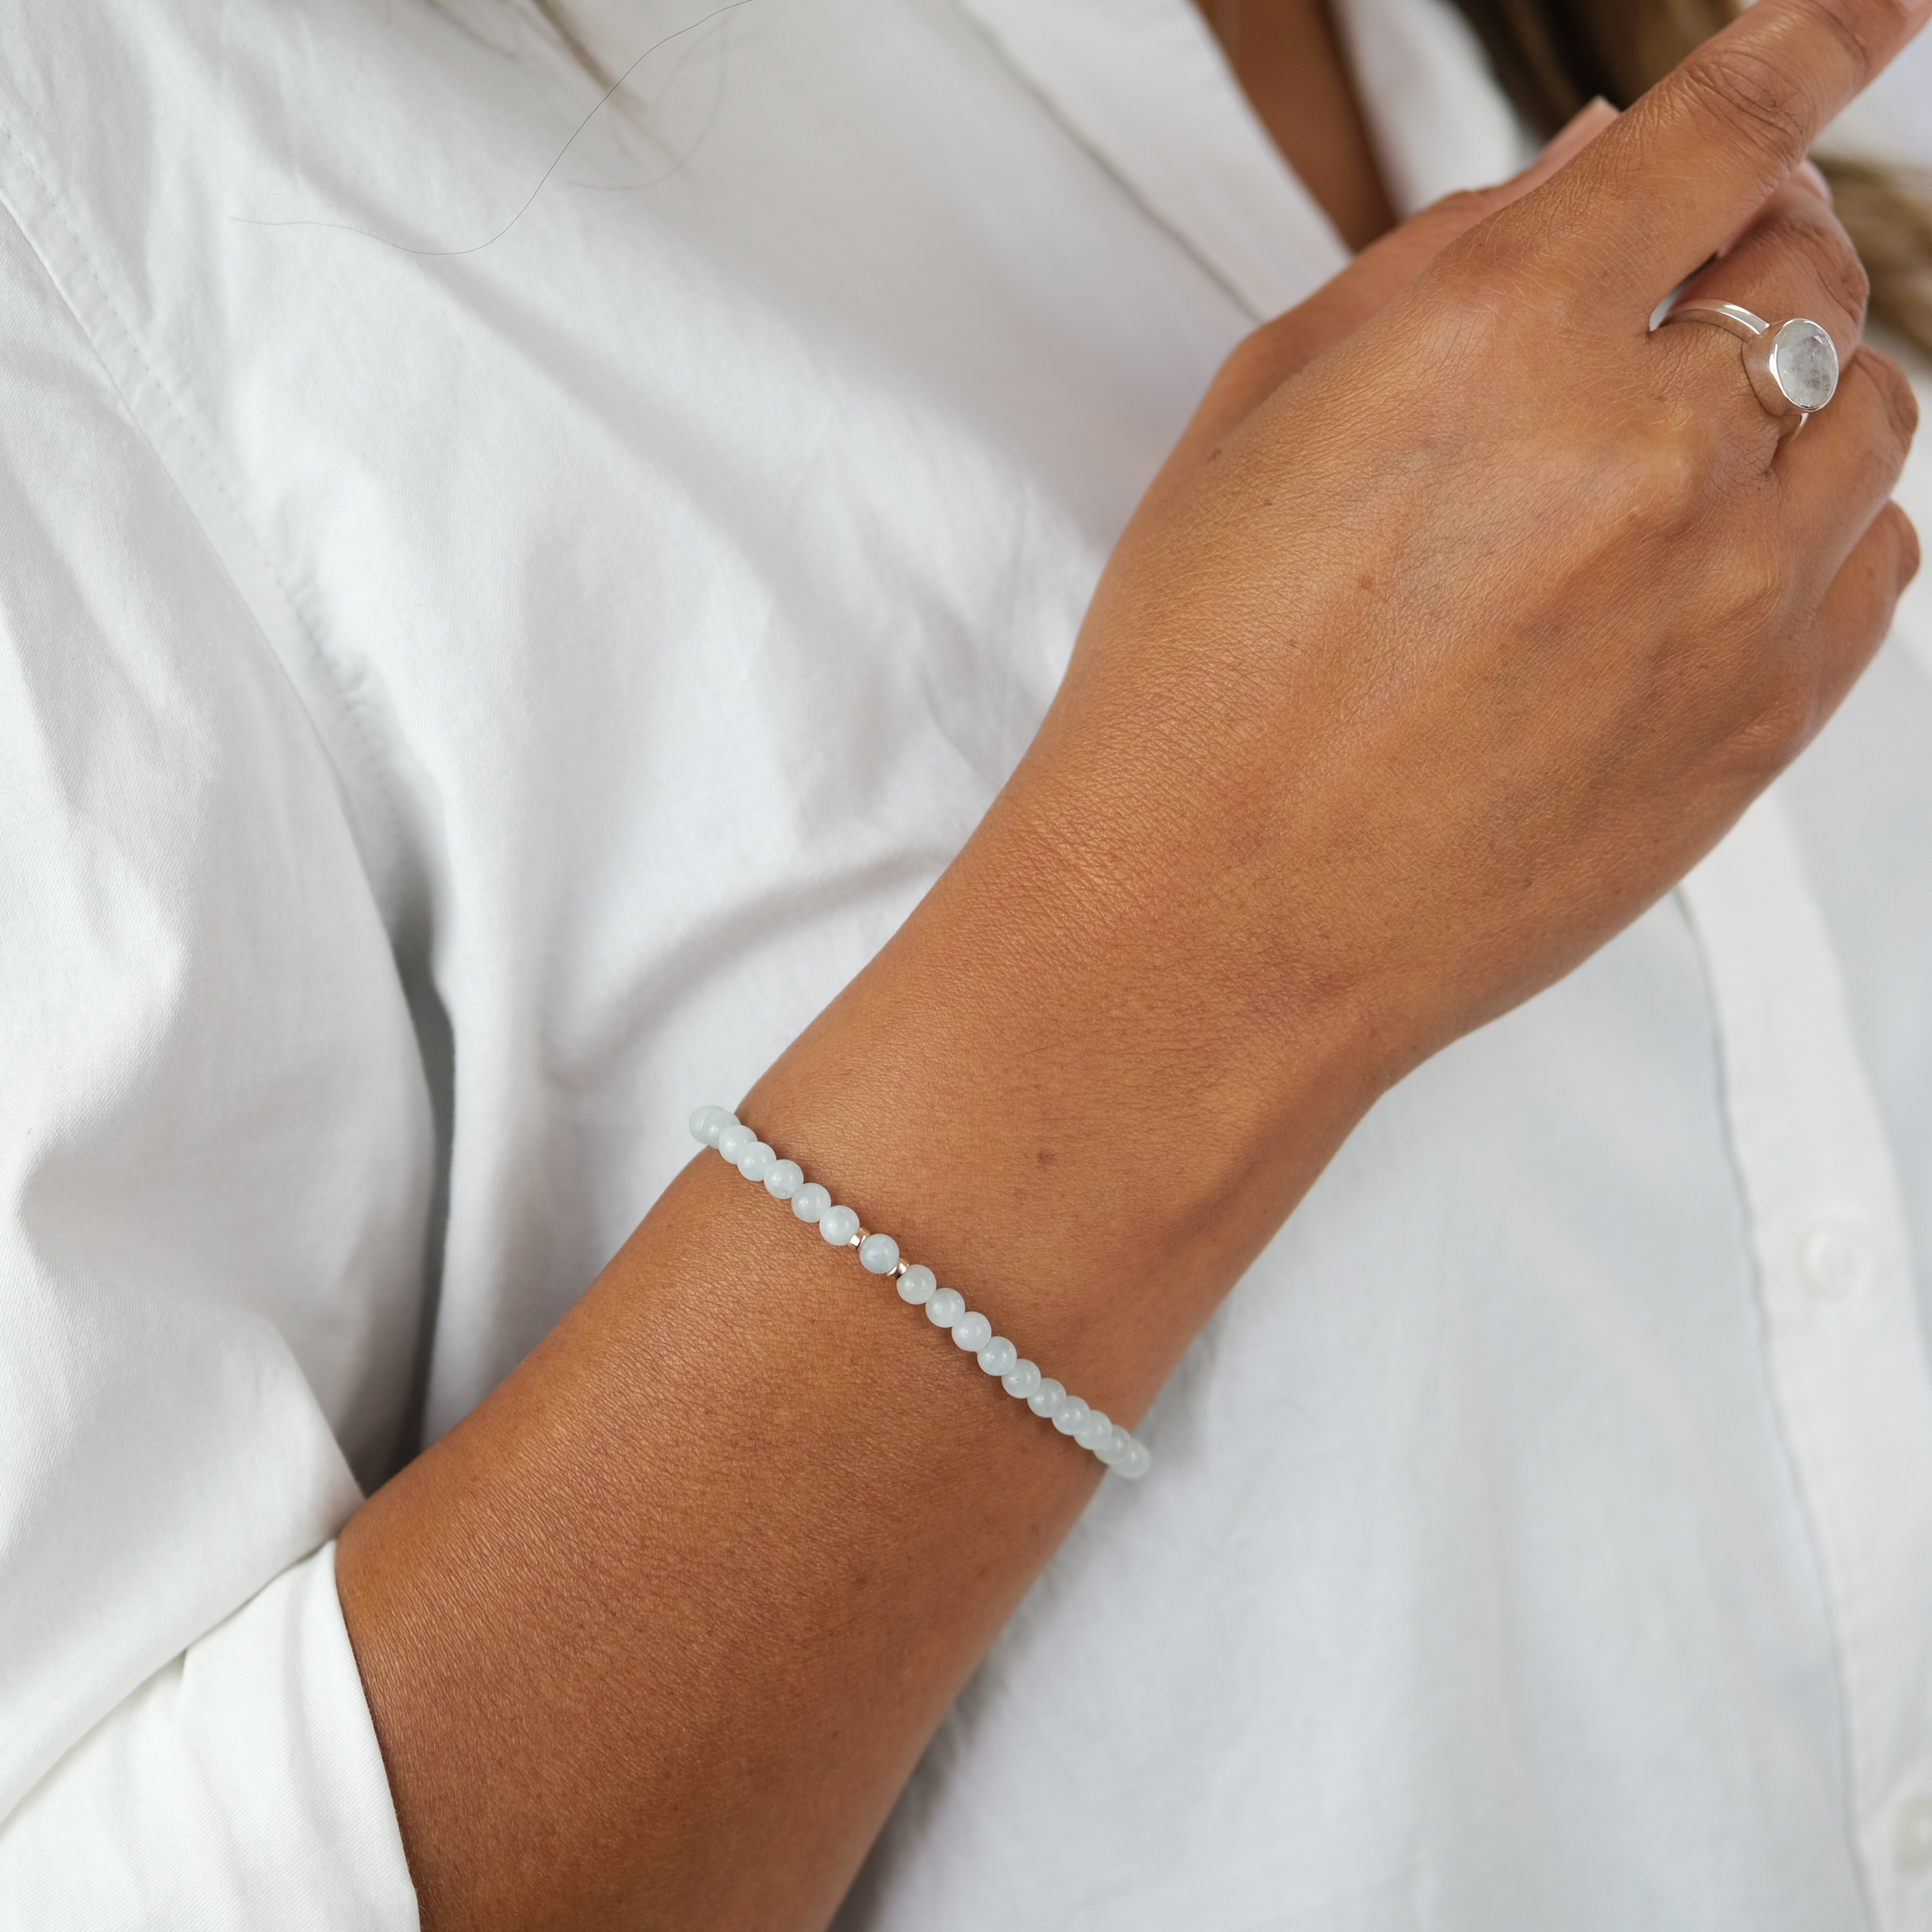 A model wearing Aquamarine gemstone bracelet in 4mm beads with gold accessories